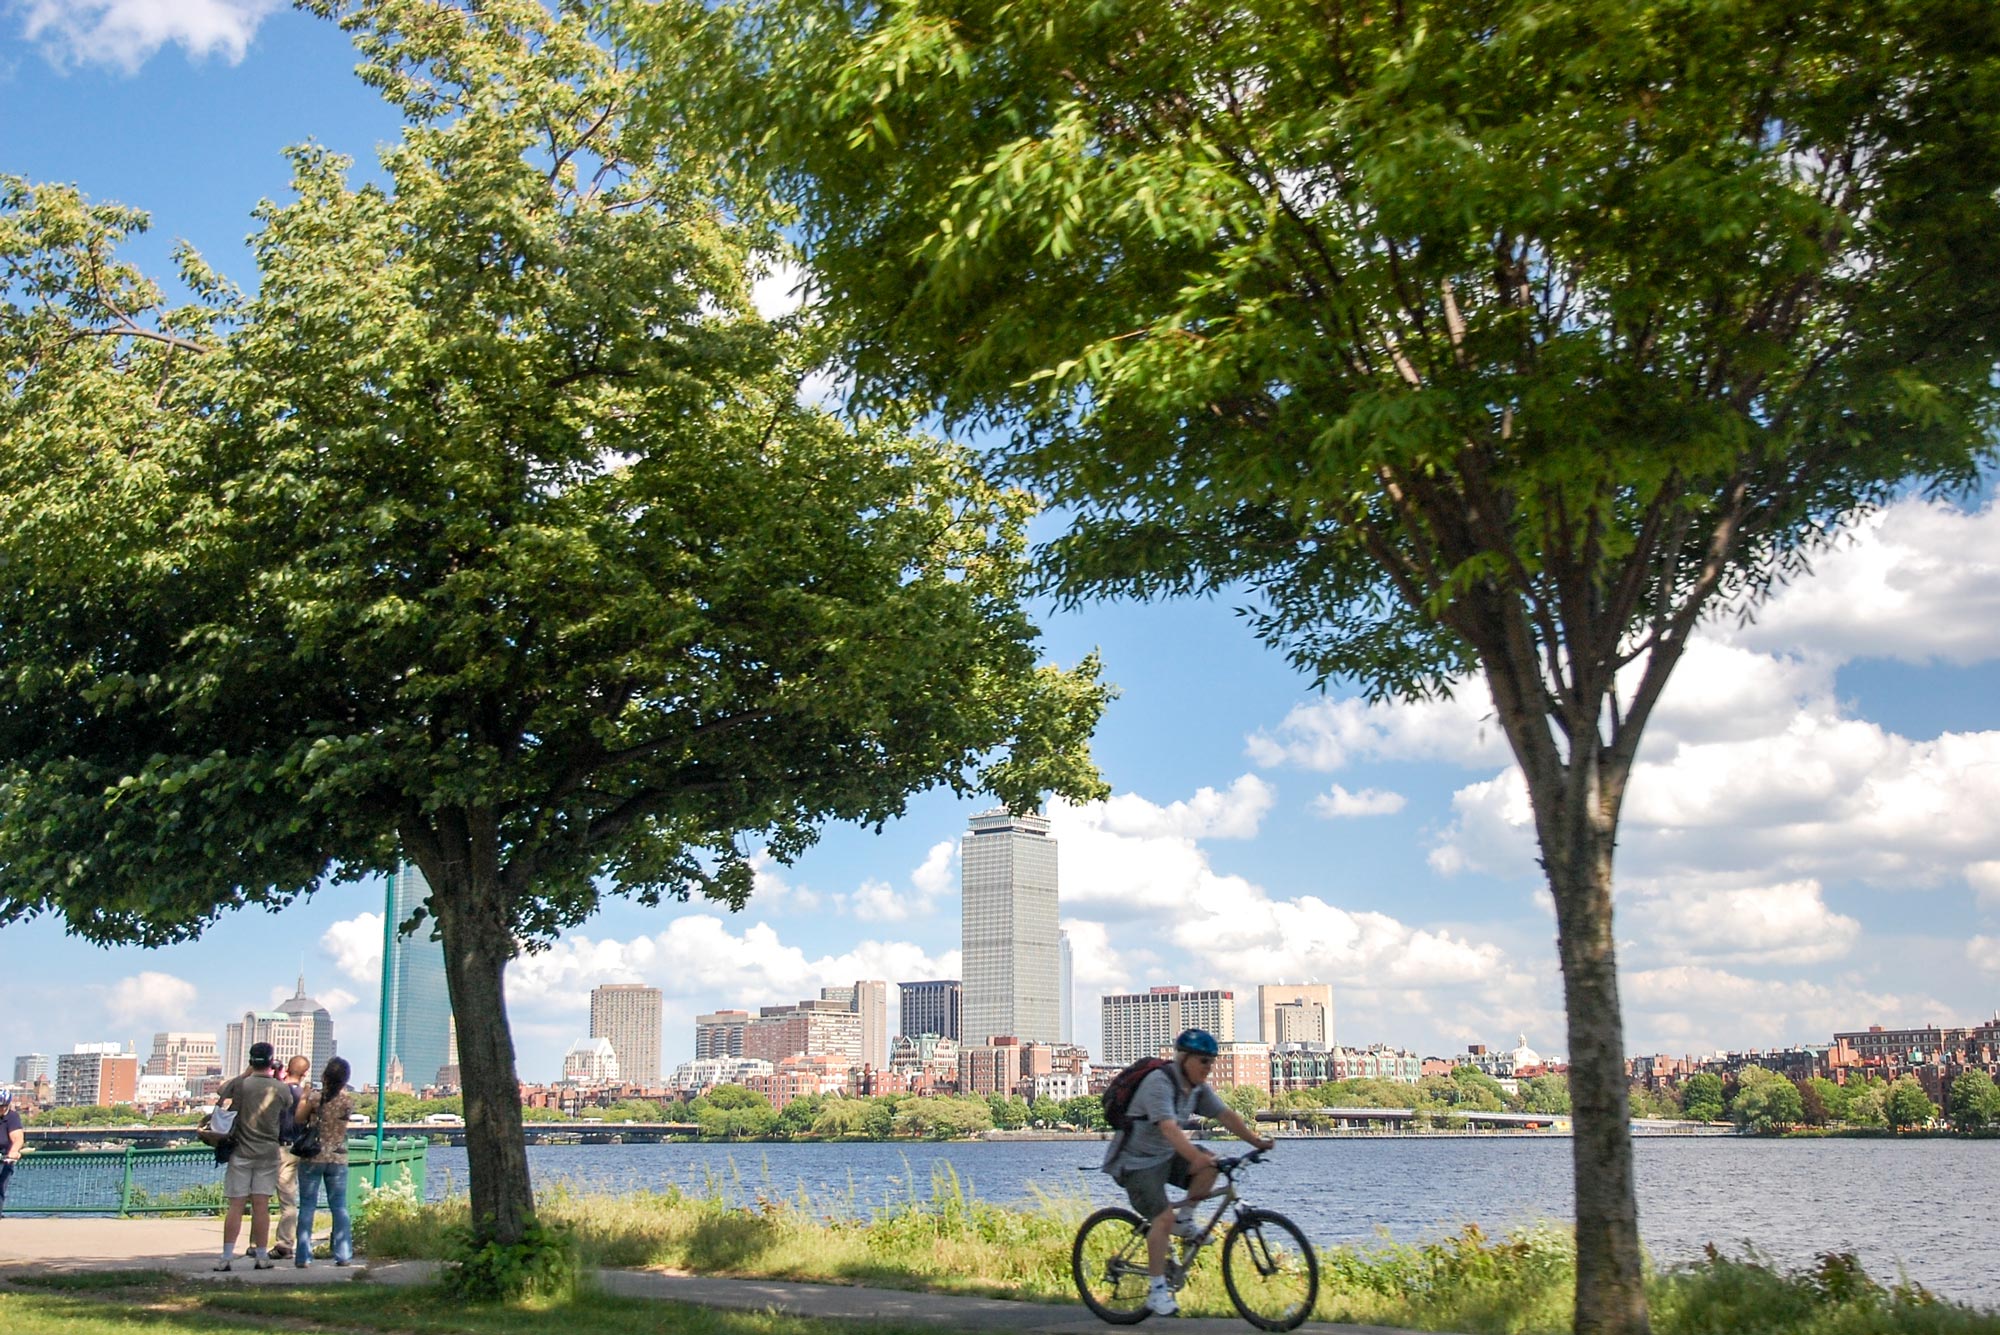 A photo of people riding bikes on the Charles River Esplanade